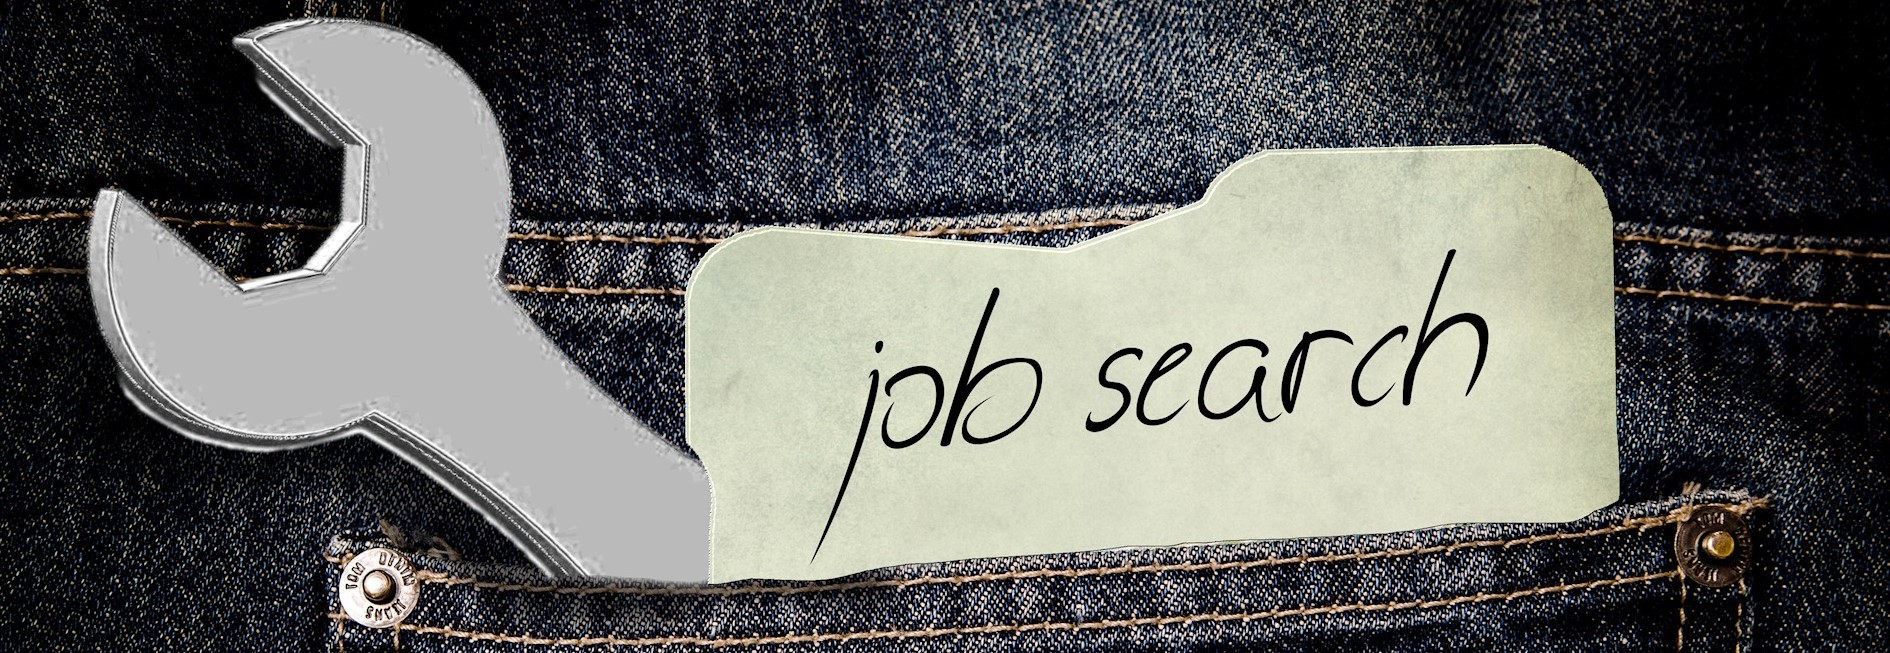 Are you applying for jobs the right way?